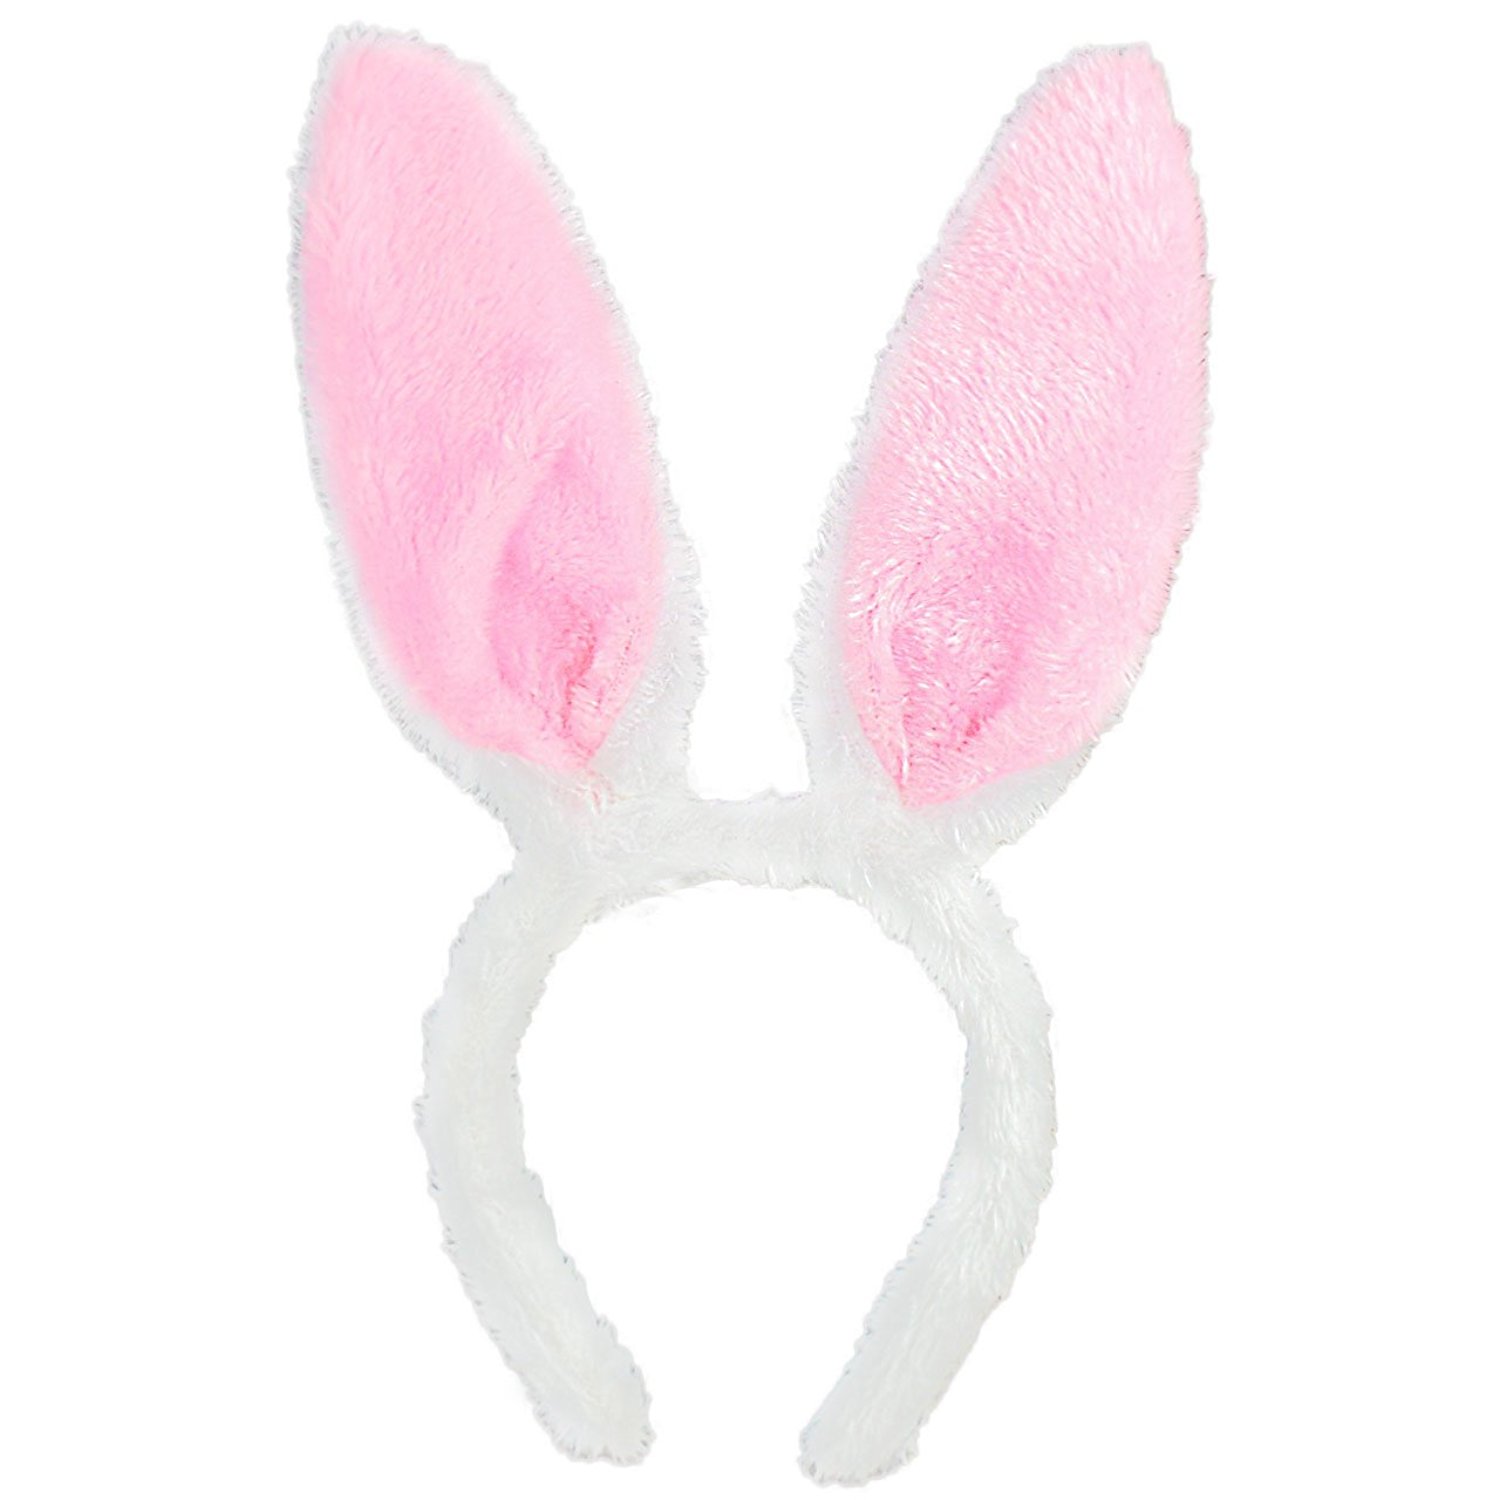 Easter Bunny Ears Fancy Dress Accessory White with Pink Rabbit Ears ...